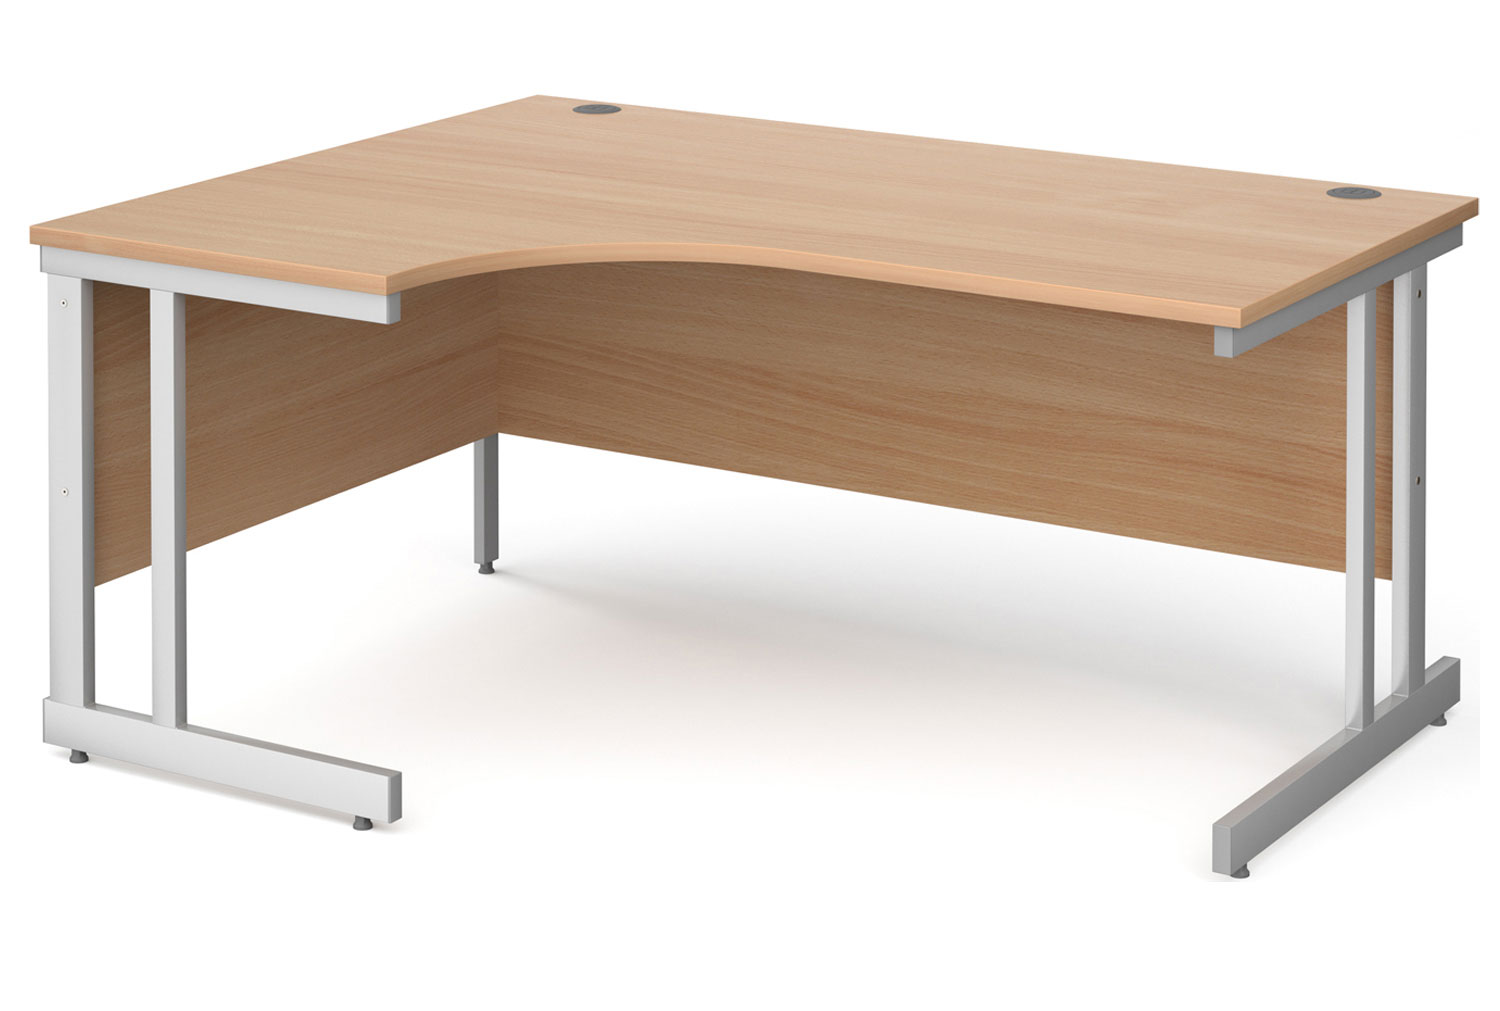 Tully II Left Hand Ergonomic Office Desk, 160wx120/80dx73h (cm), Beech, Express Delivery